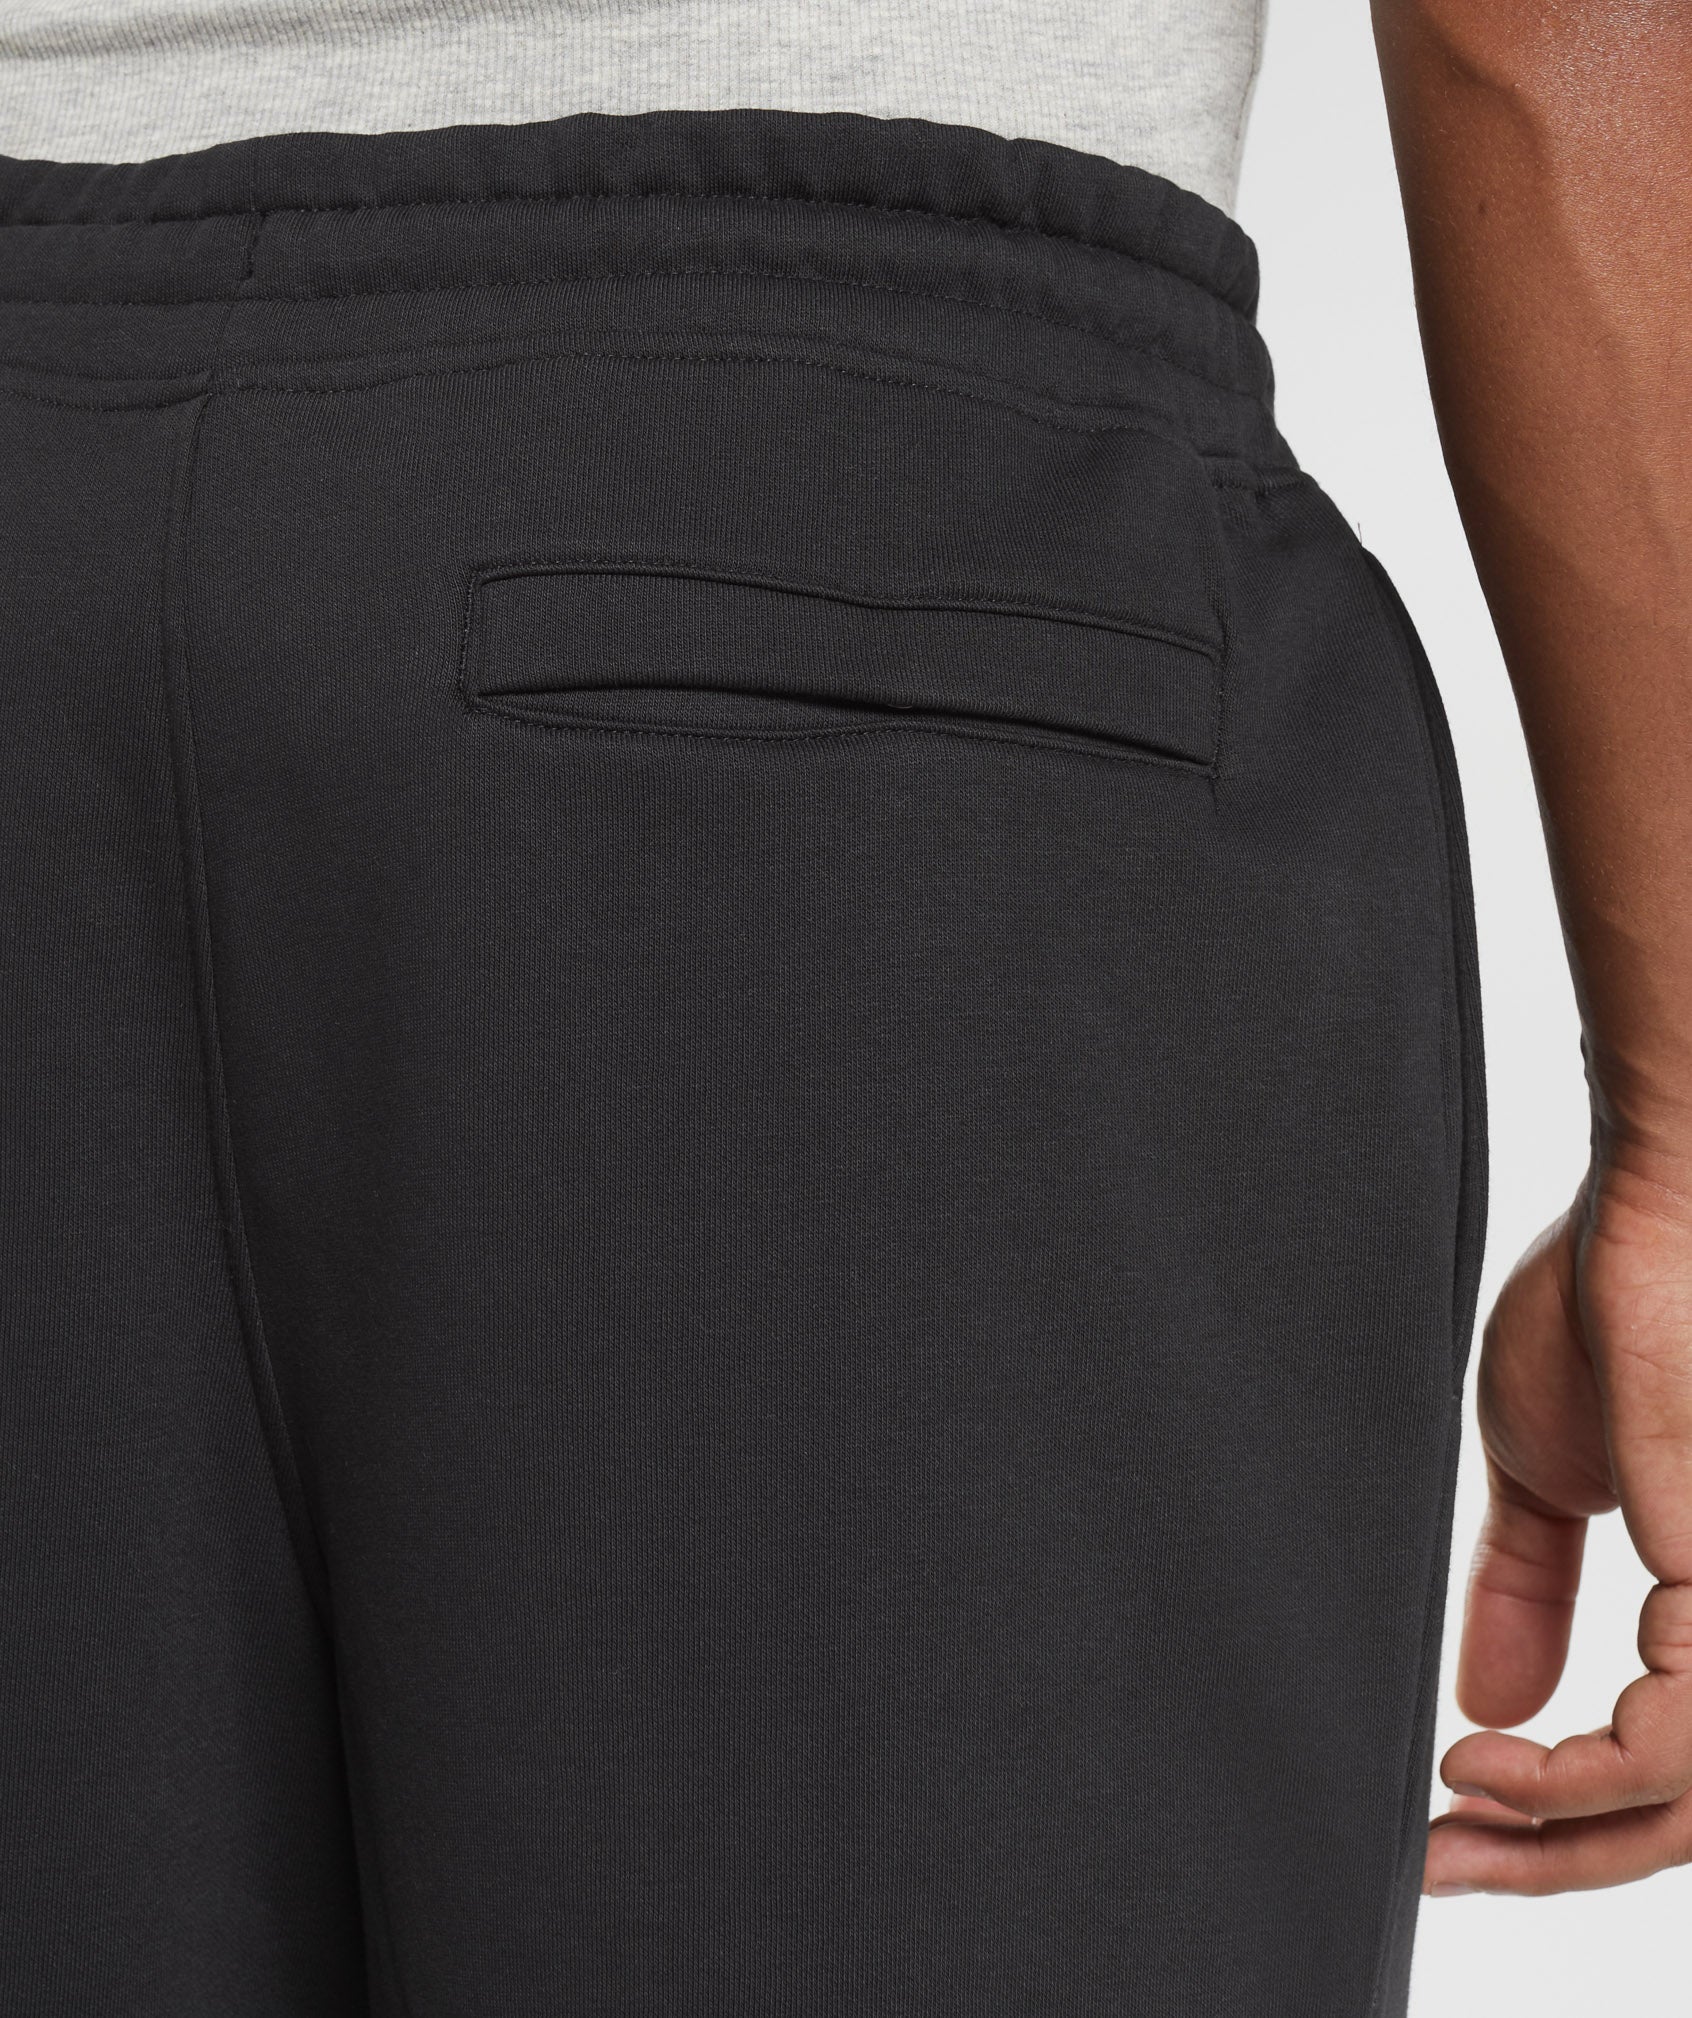 Crest Straight Leg Joggers in Black - view 6